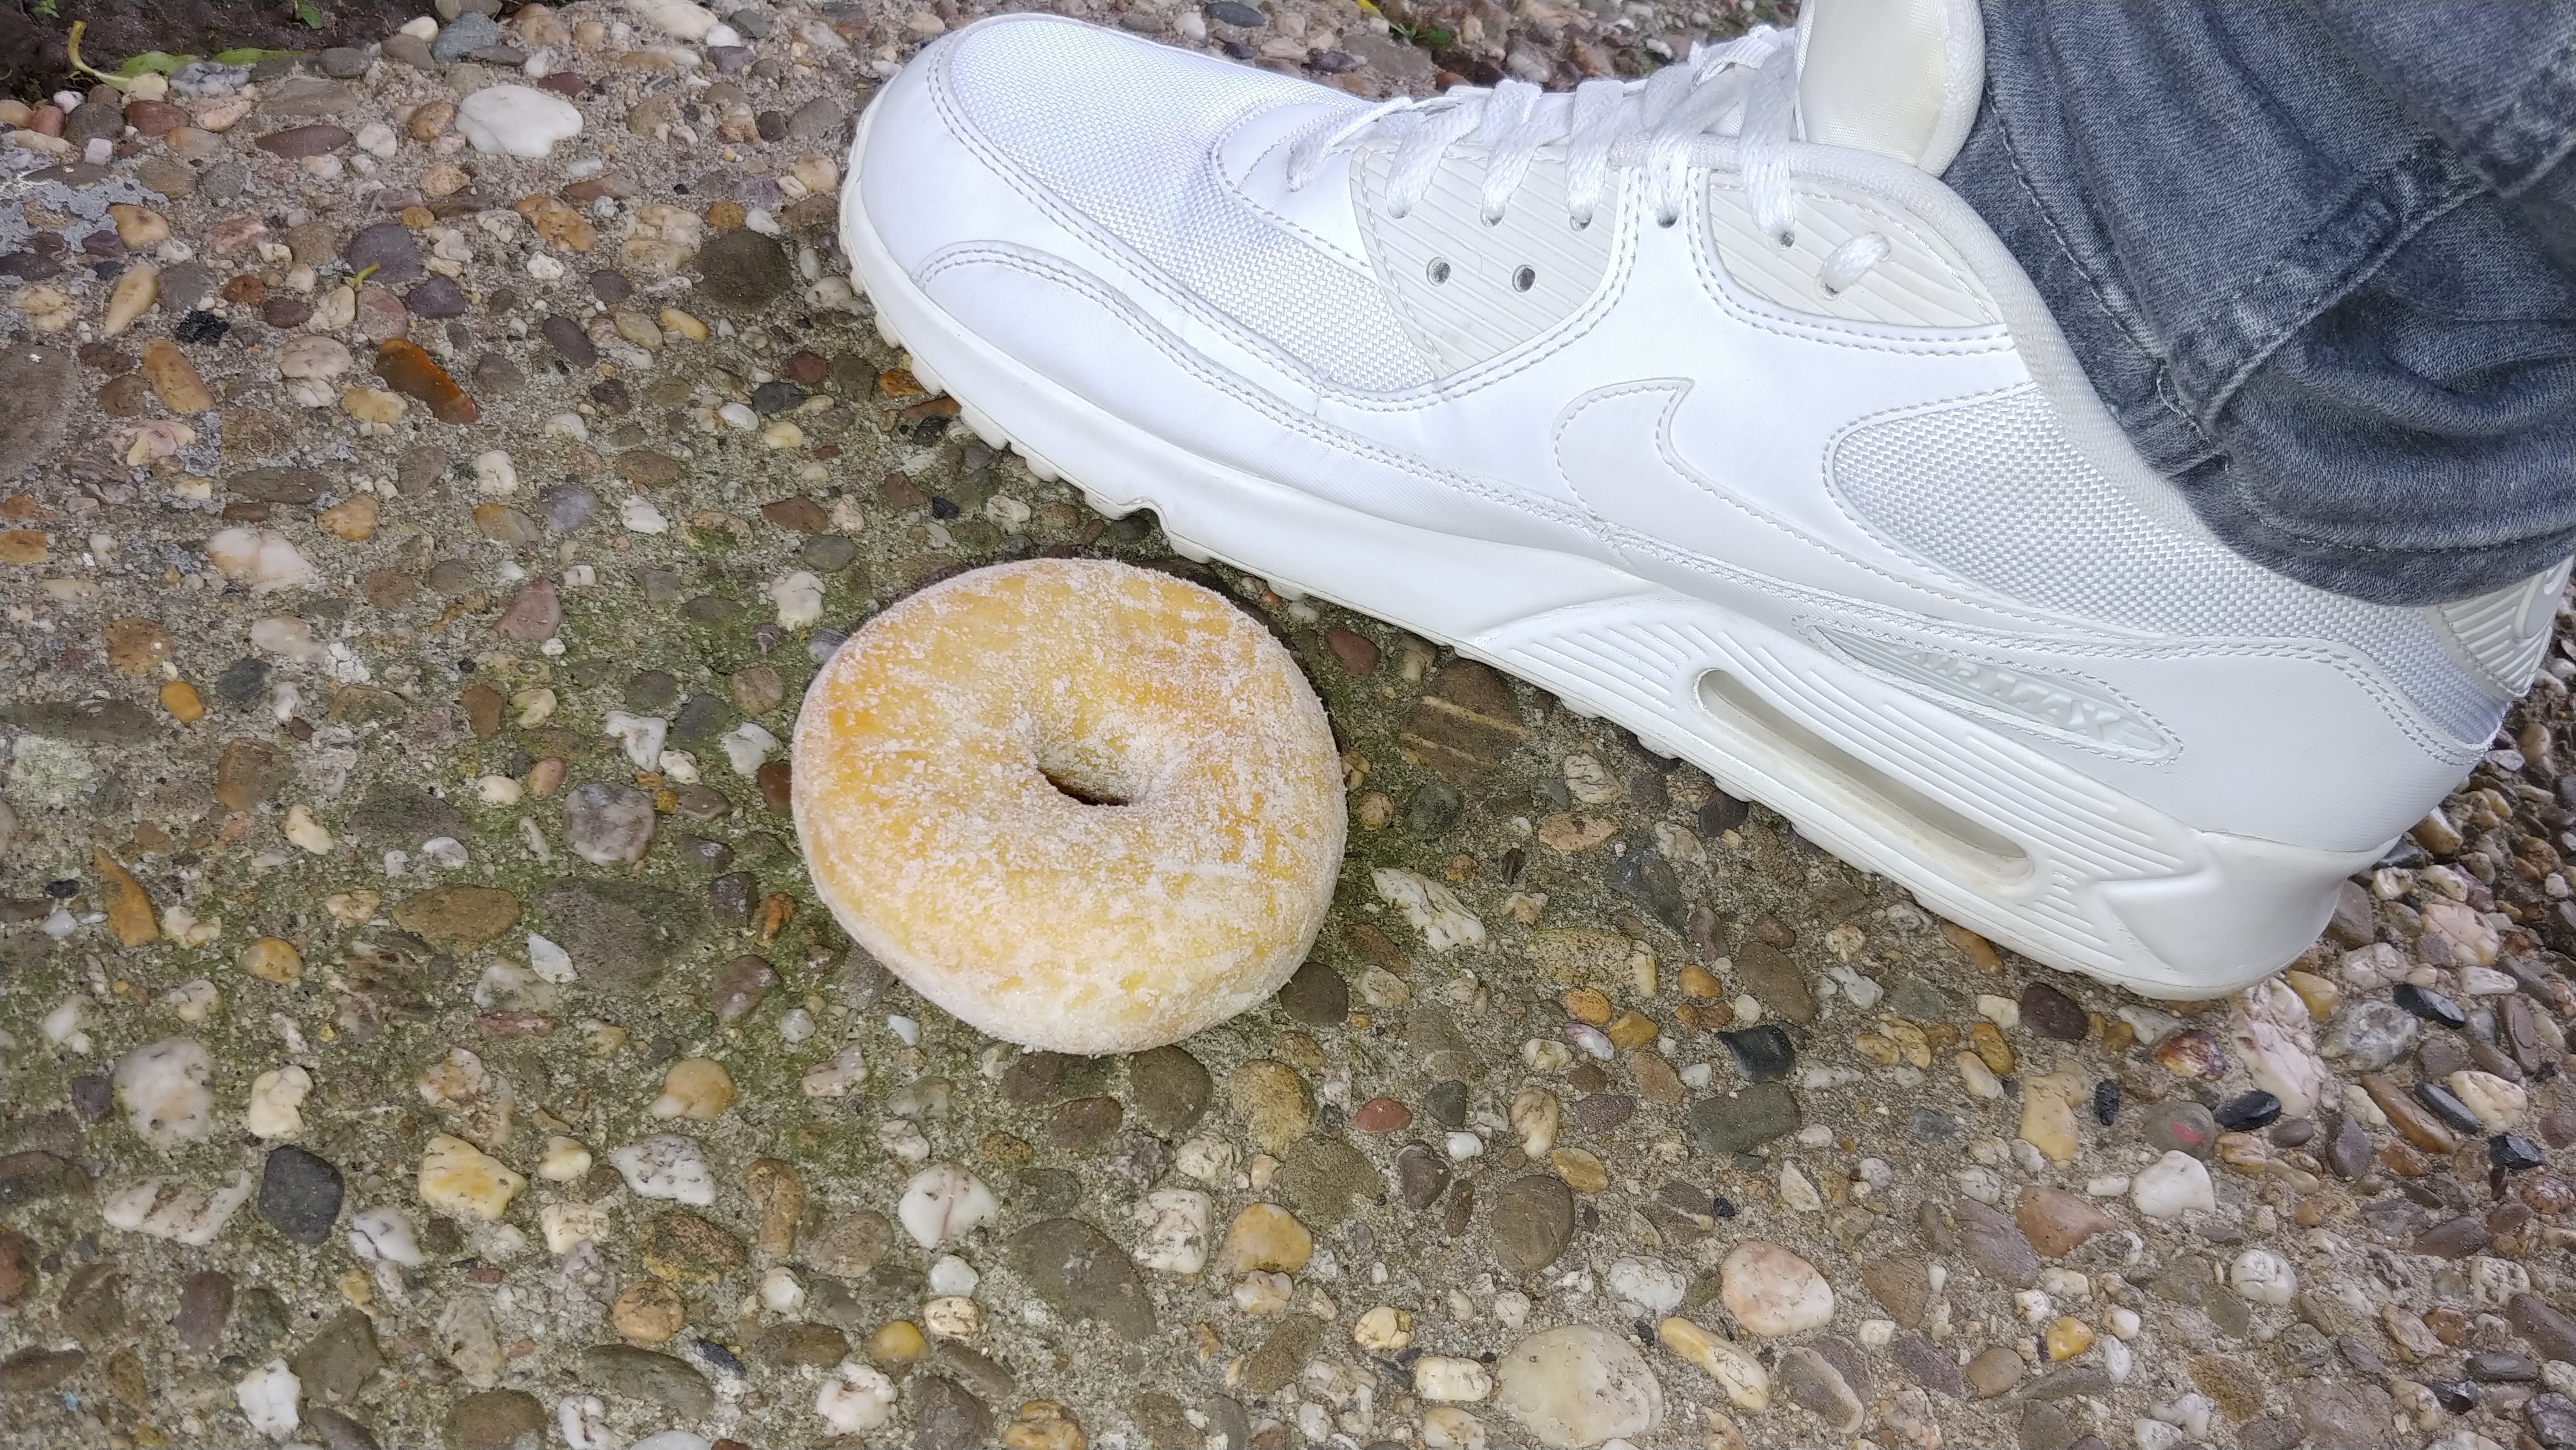 Brutally stomping on a donut